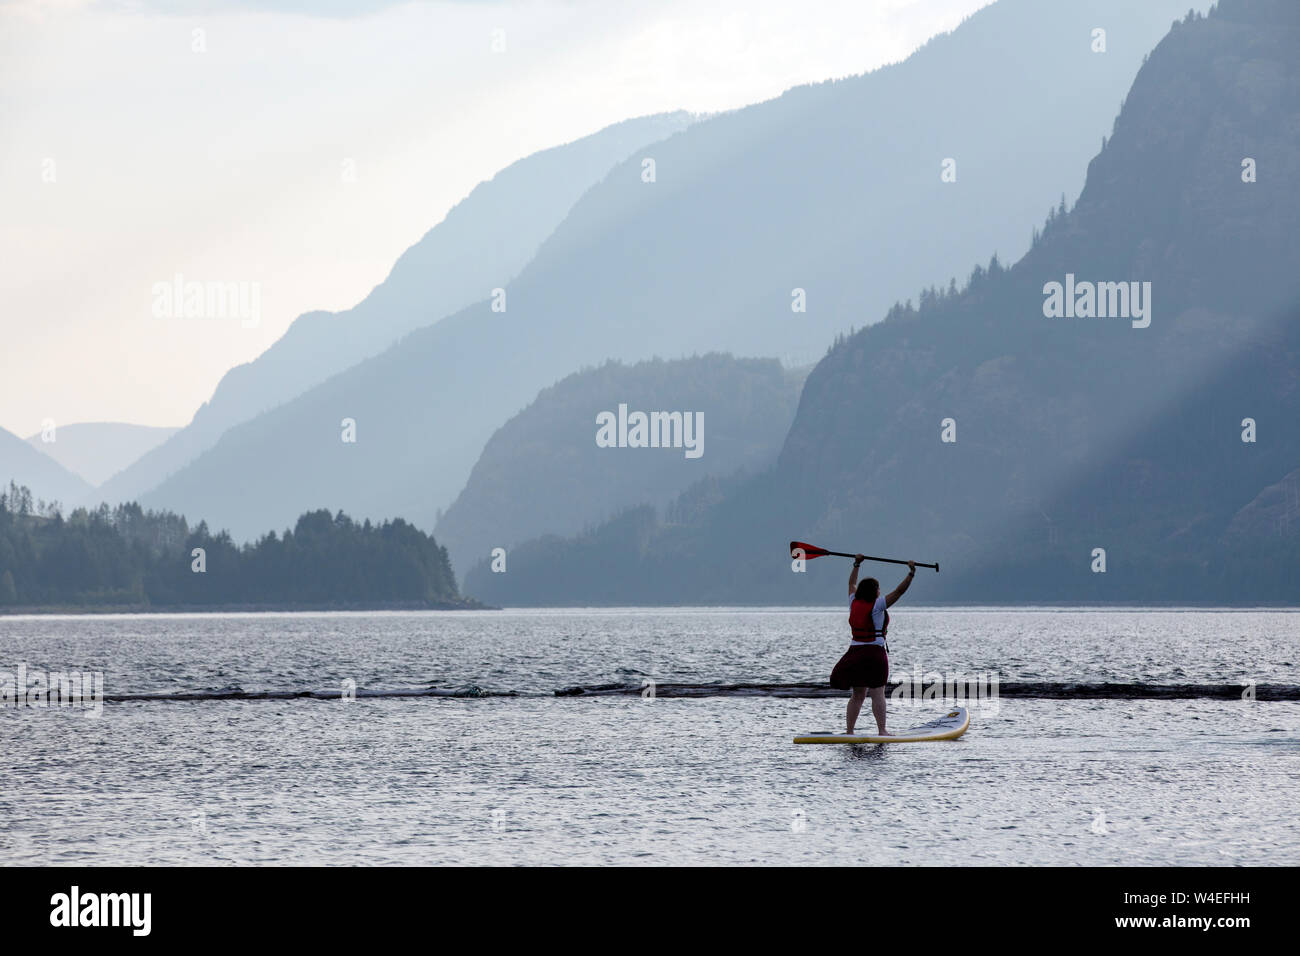 Young girl stand-up paddleboarding on Upper Campbell Lake at Strathcona Park Lodge in Strathcona Provincial Park, near Campbell River, Vancouver Islan Stock Photo